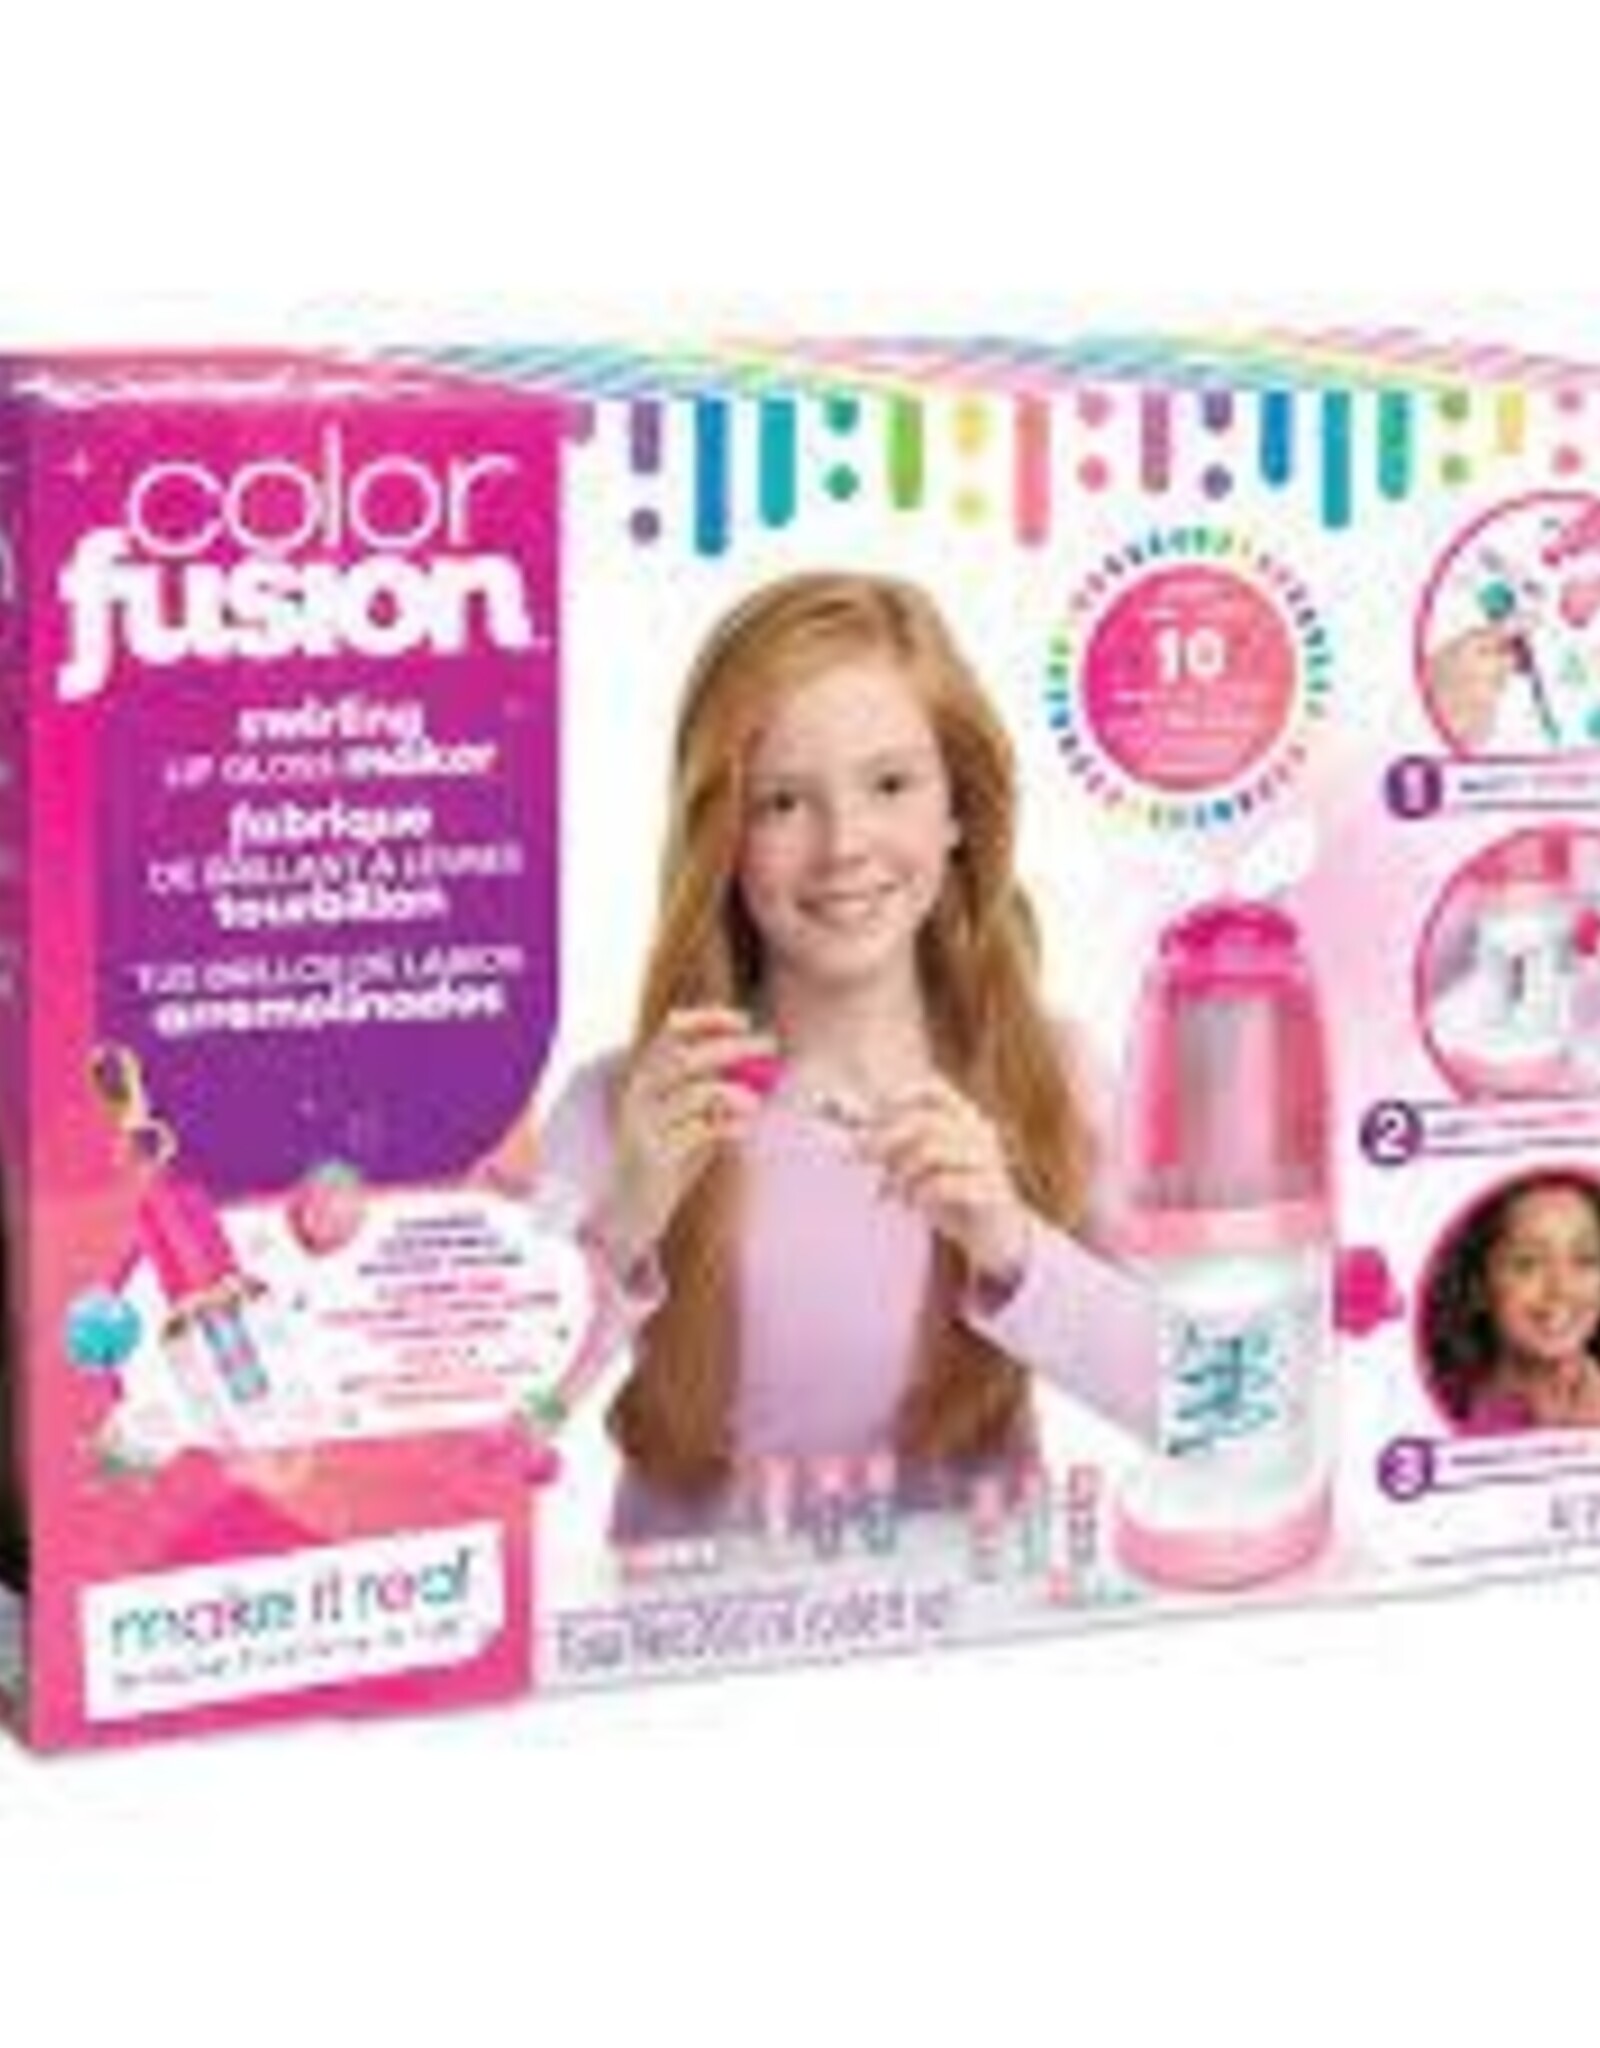 Make It Real Color Fusion: Swirling Lip Gloss Maker